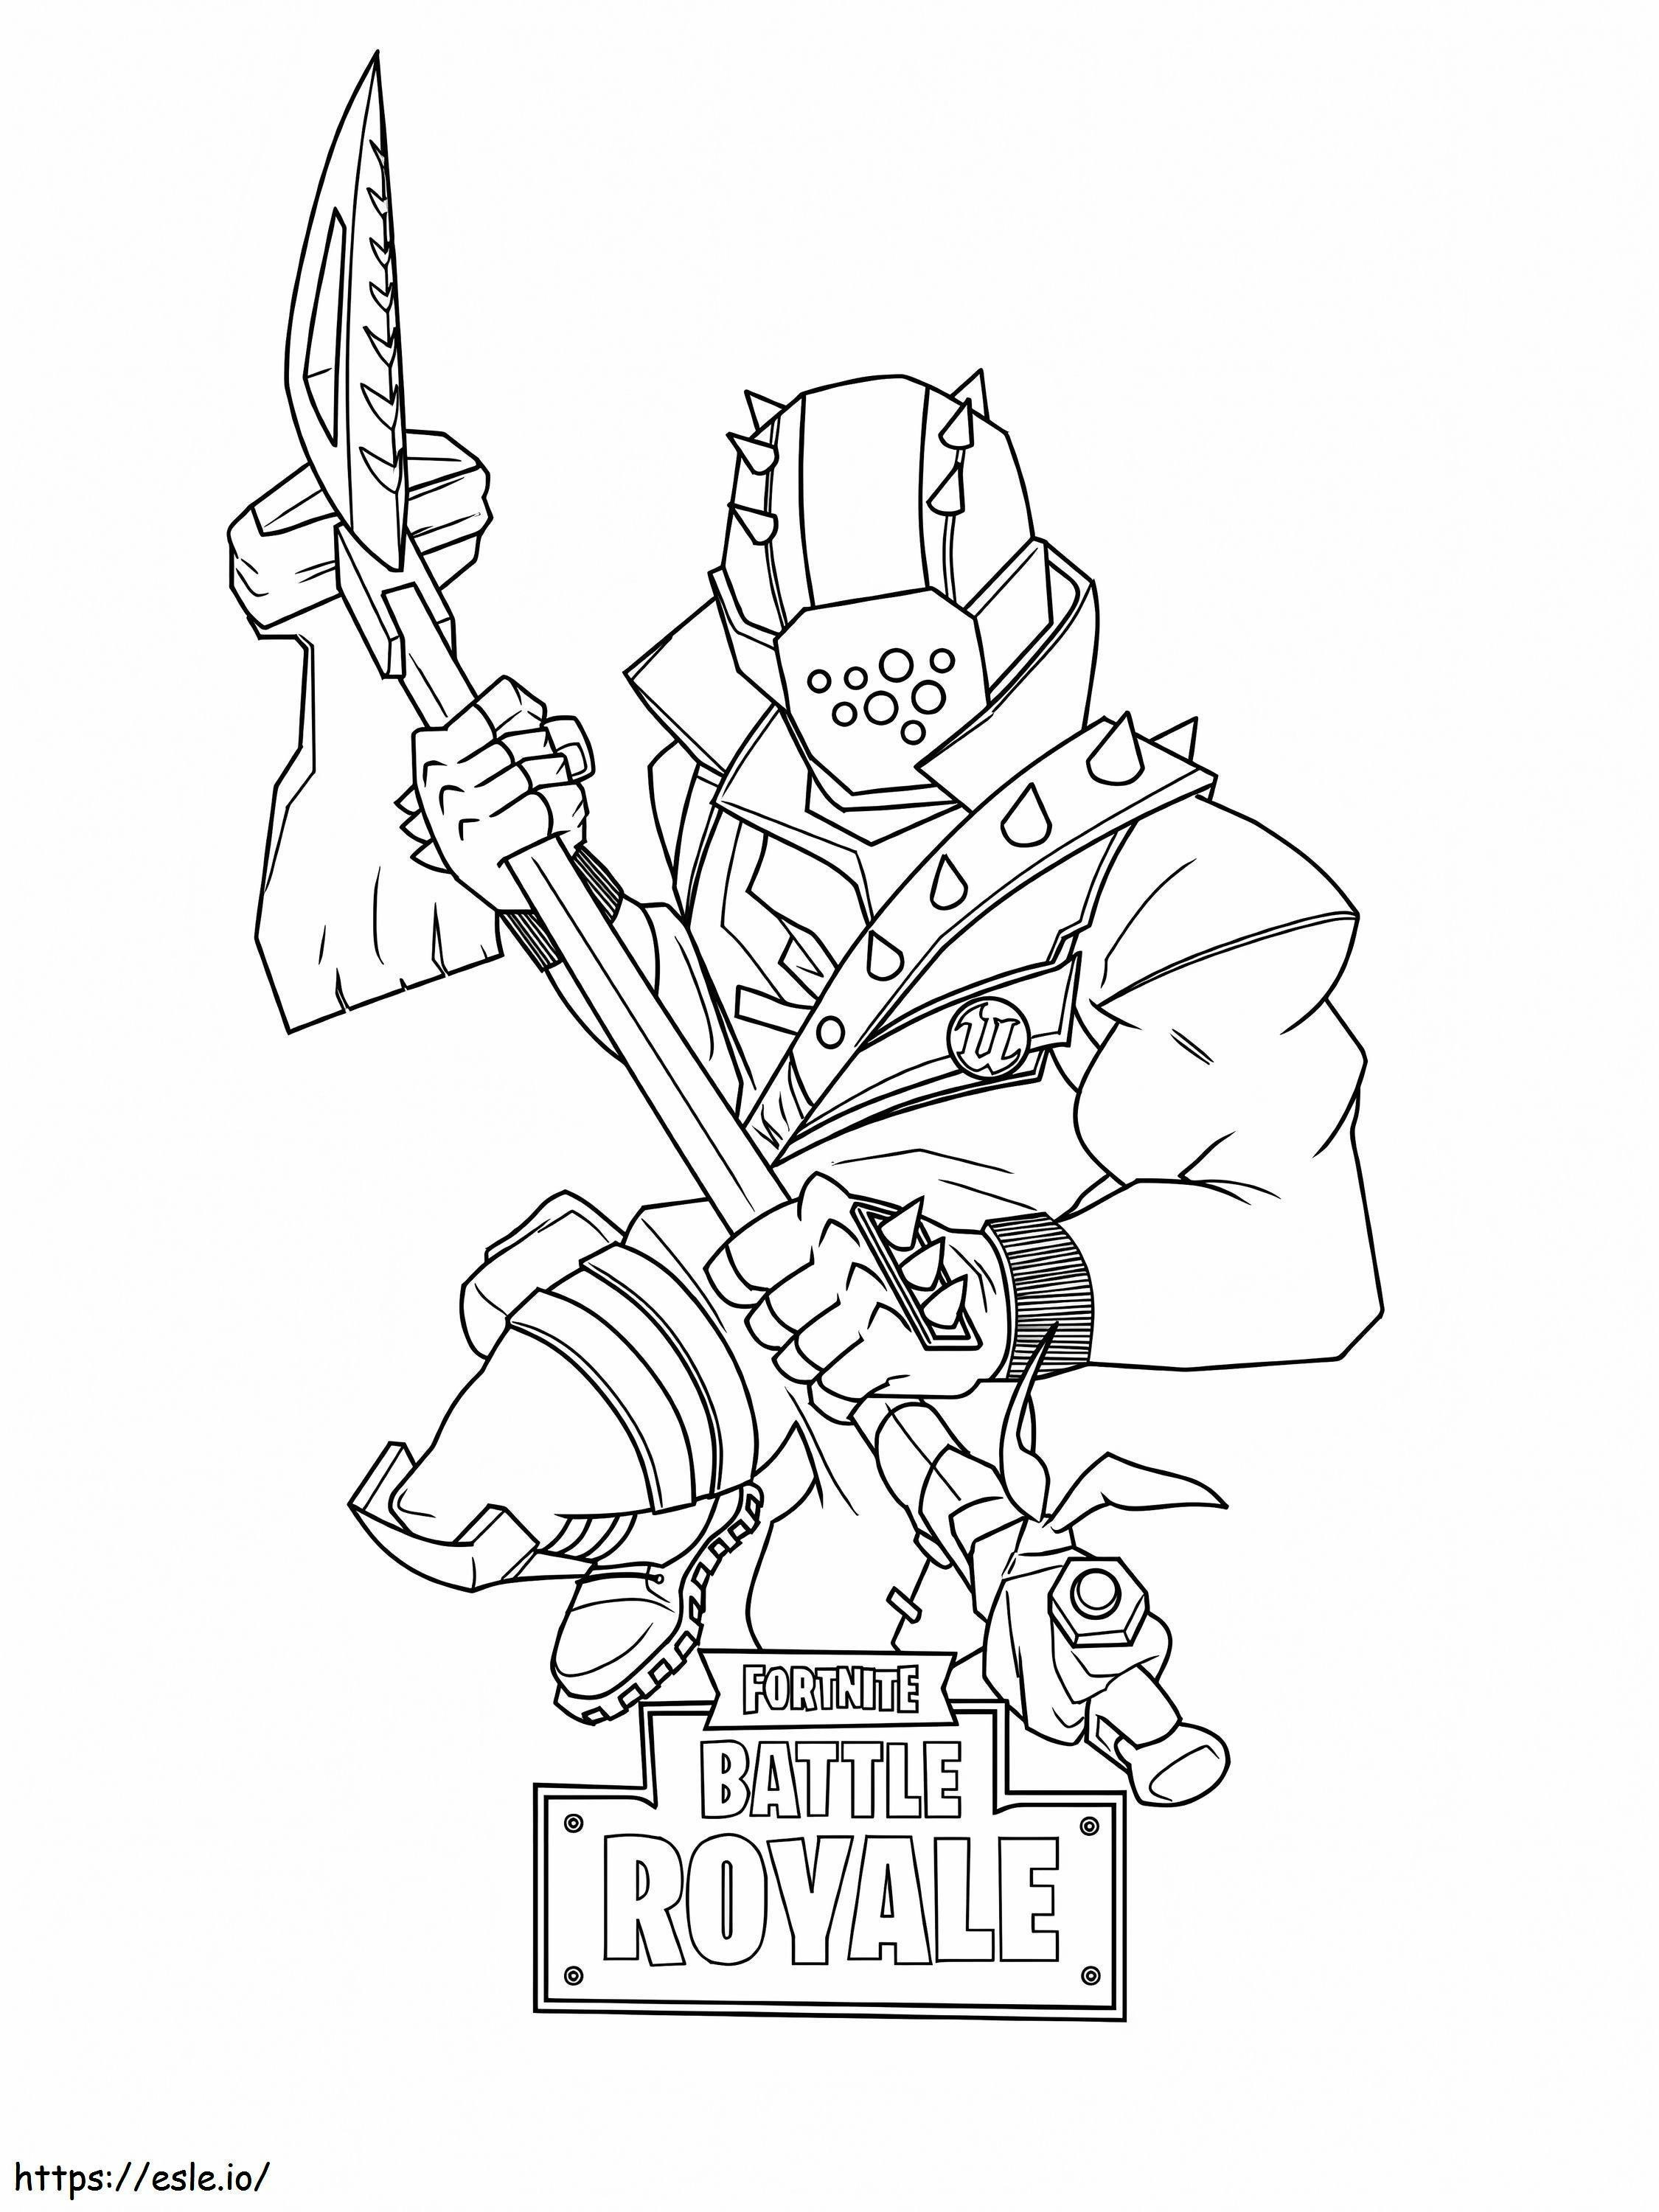 1541146524 Fortnite 004 coloring page